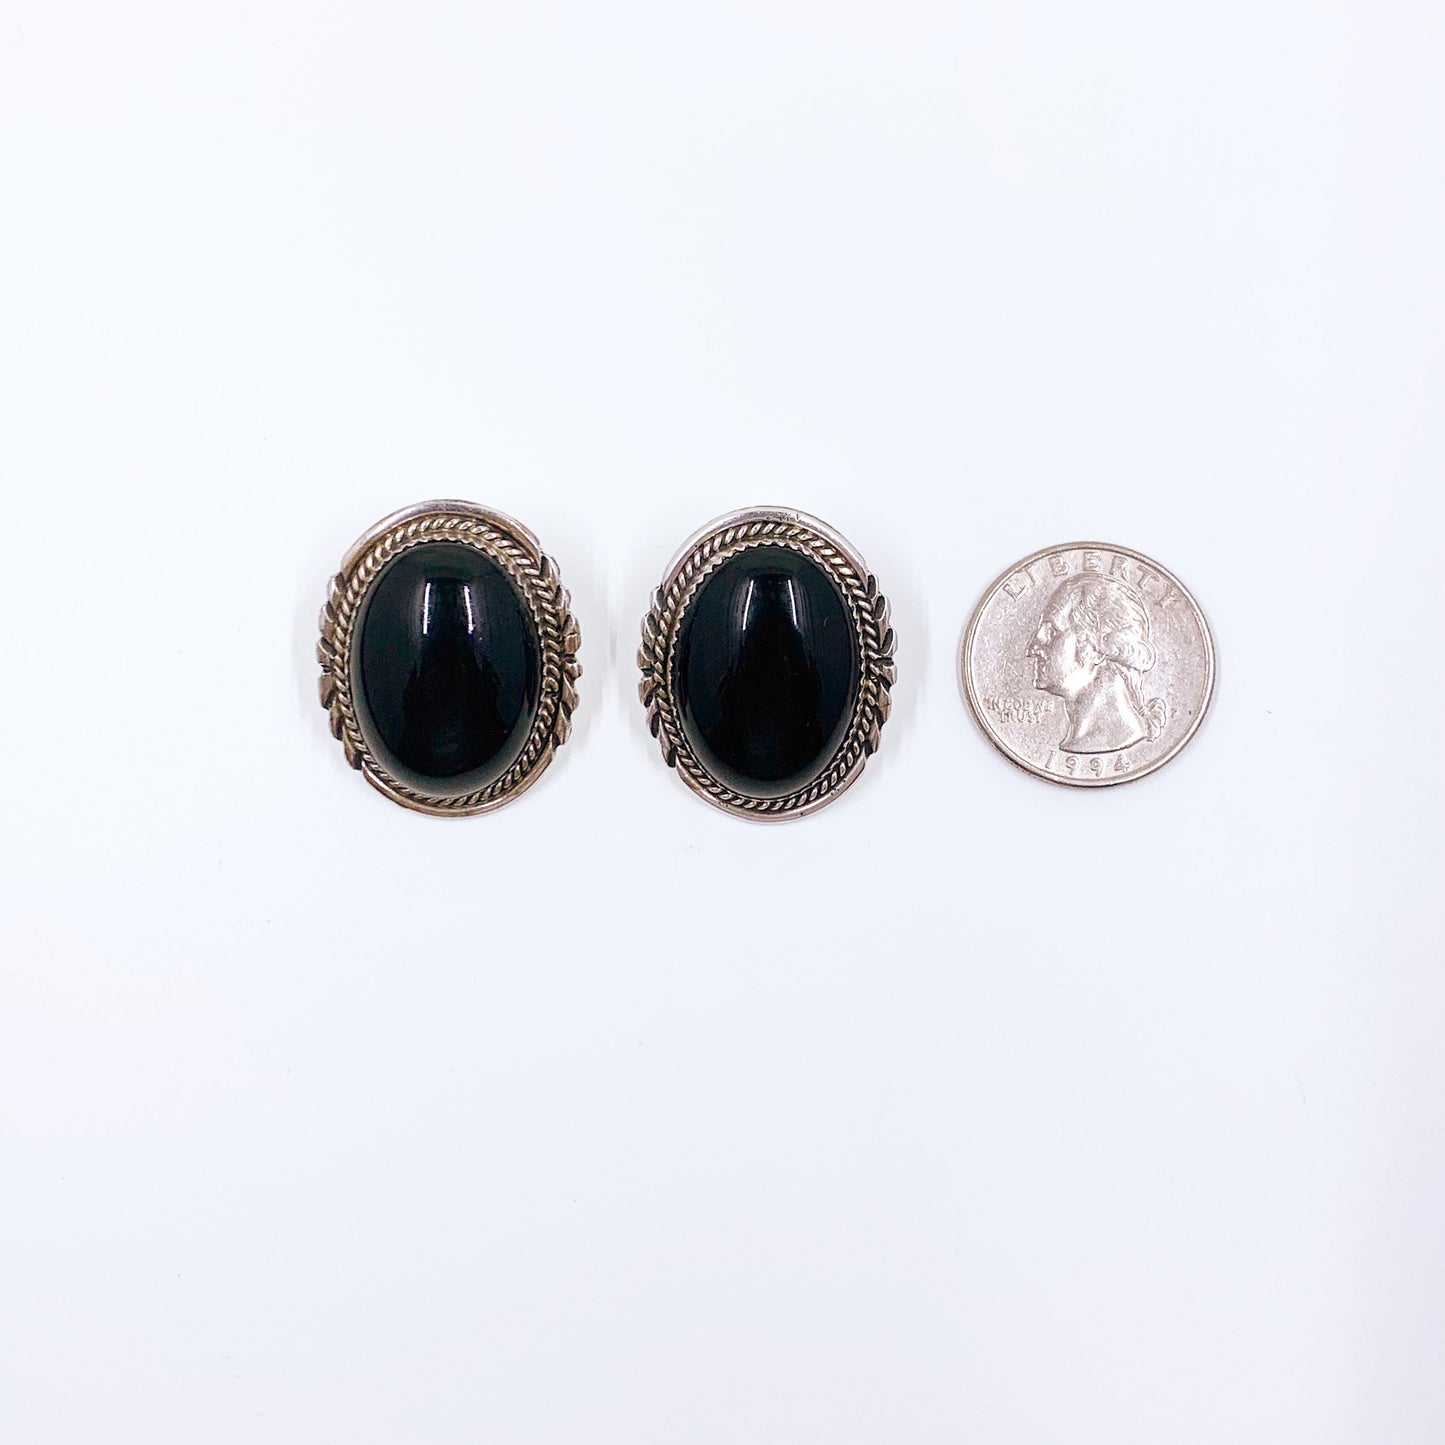 Vintage Silver Large Oval Onyx Earrings | Signed L. Spencer Native American Onyx Earrings | Black Onyx Large Studs